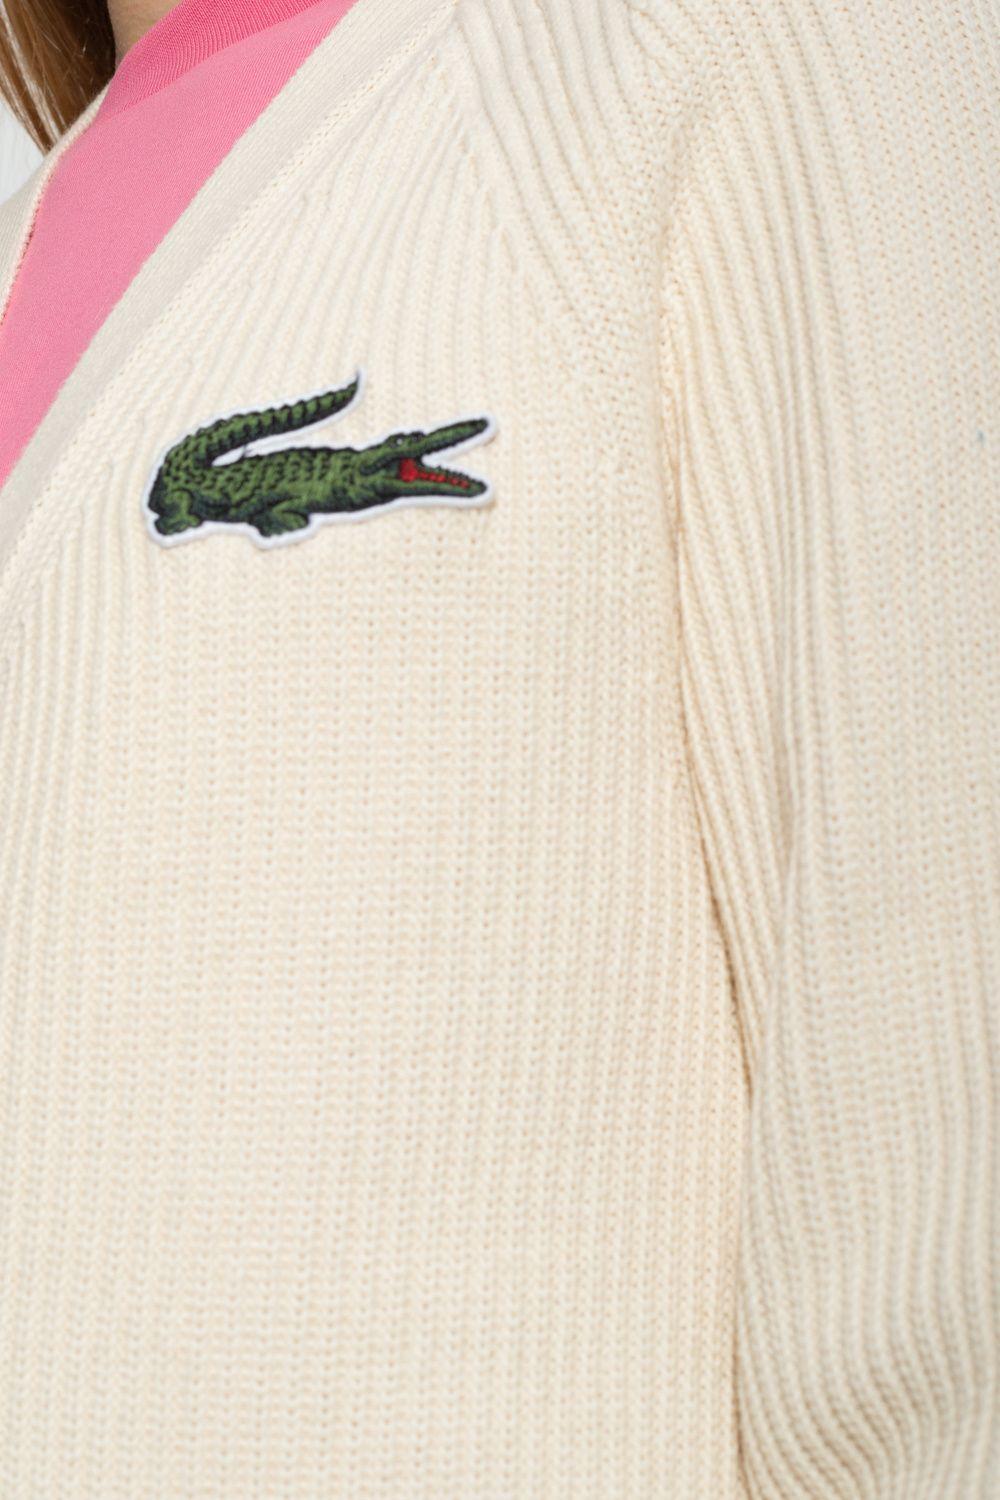 Lacoste Cardigan With Logo in Natural | Lyst